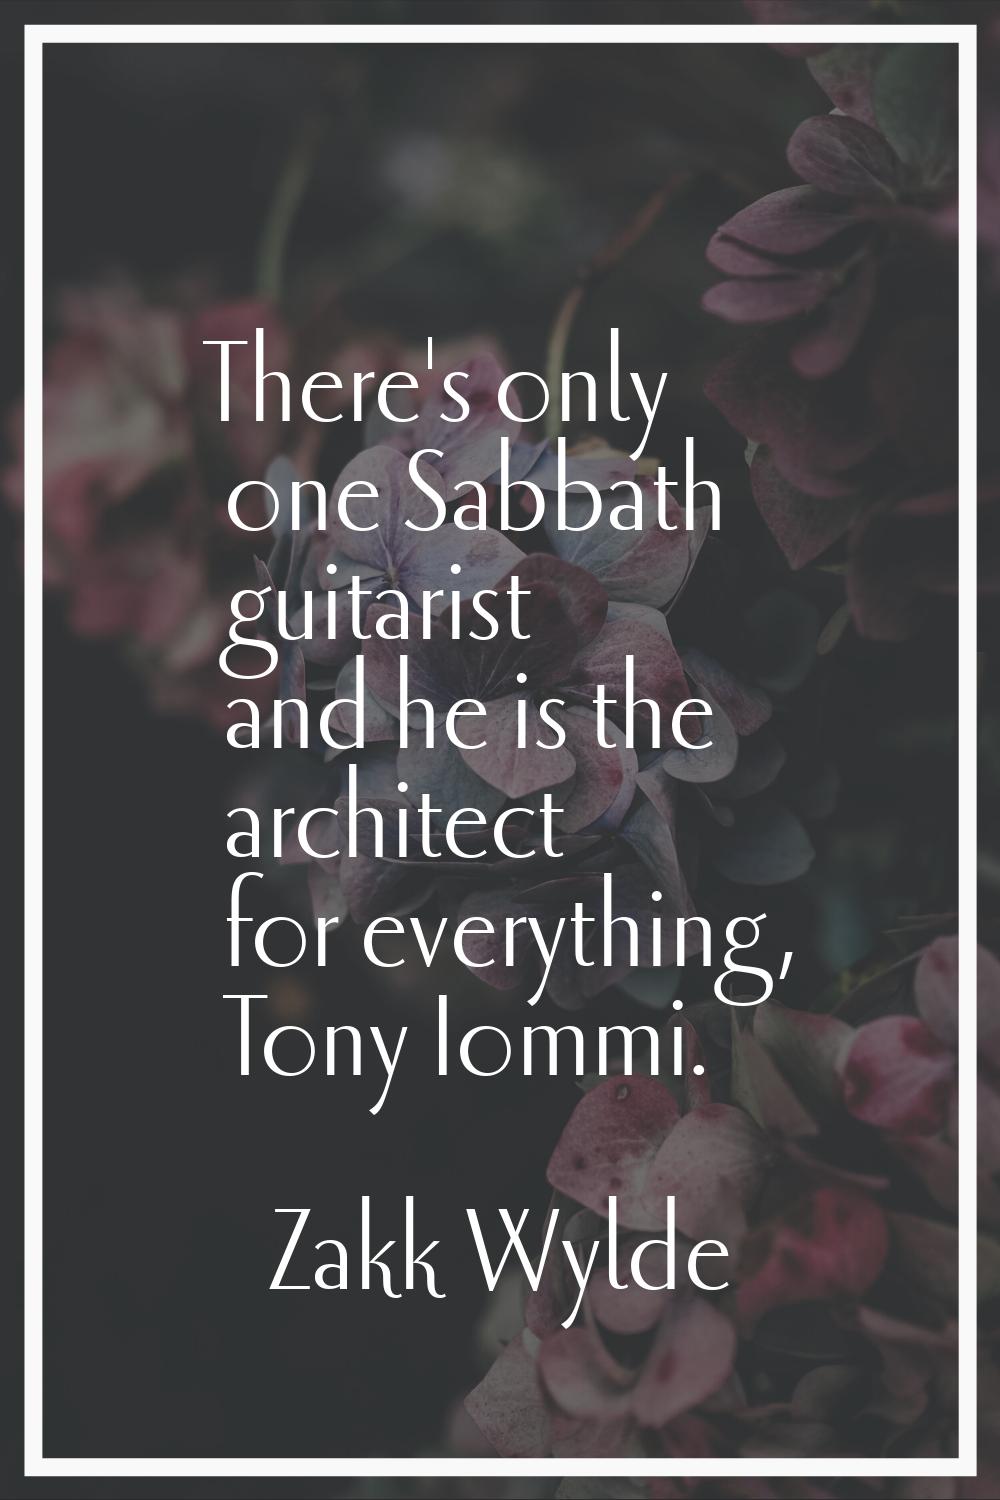 There's only one Sabbath guitarist and he is the architect for everything, Tony Iommi.